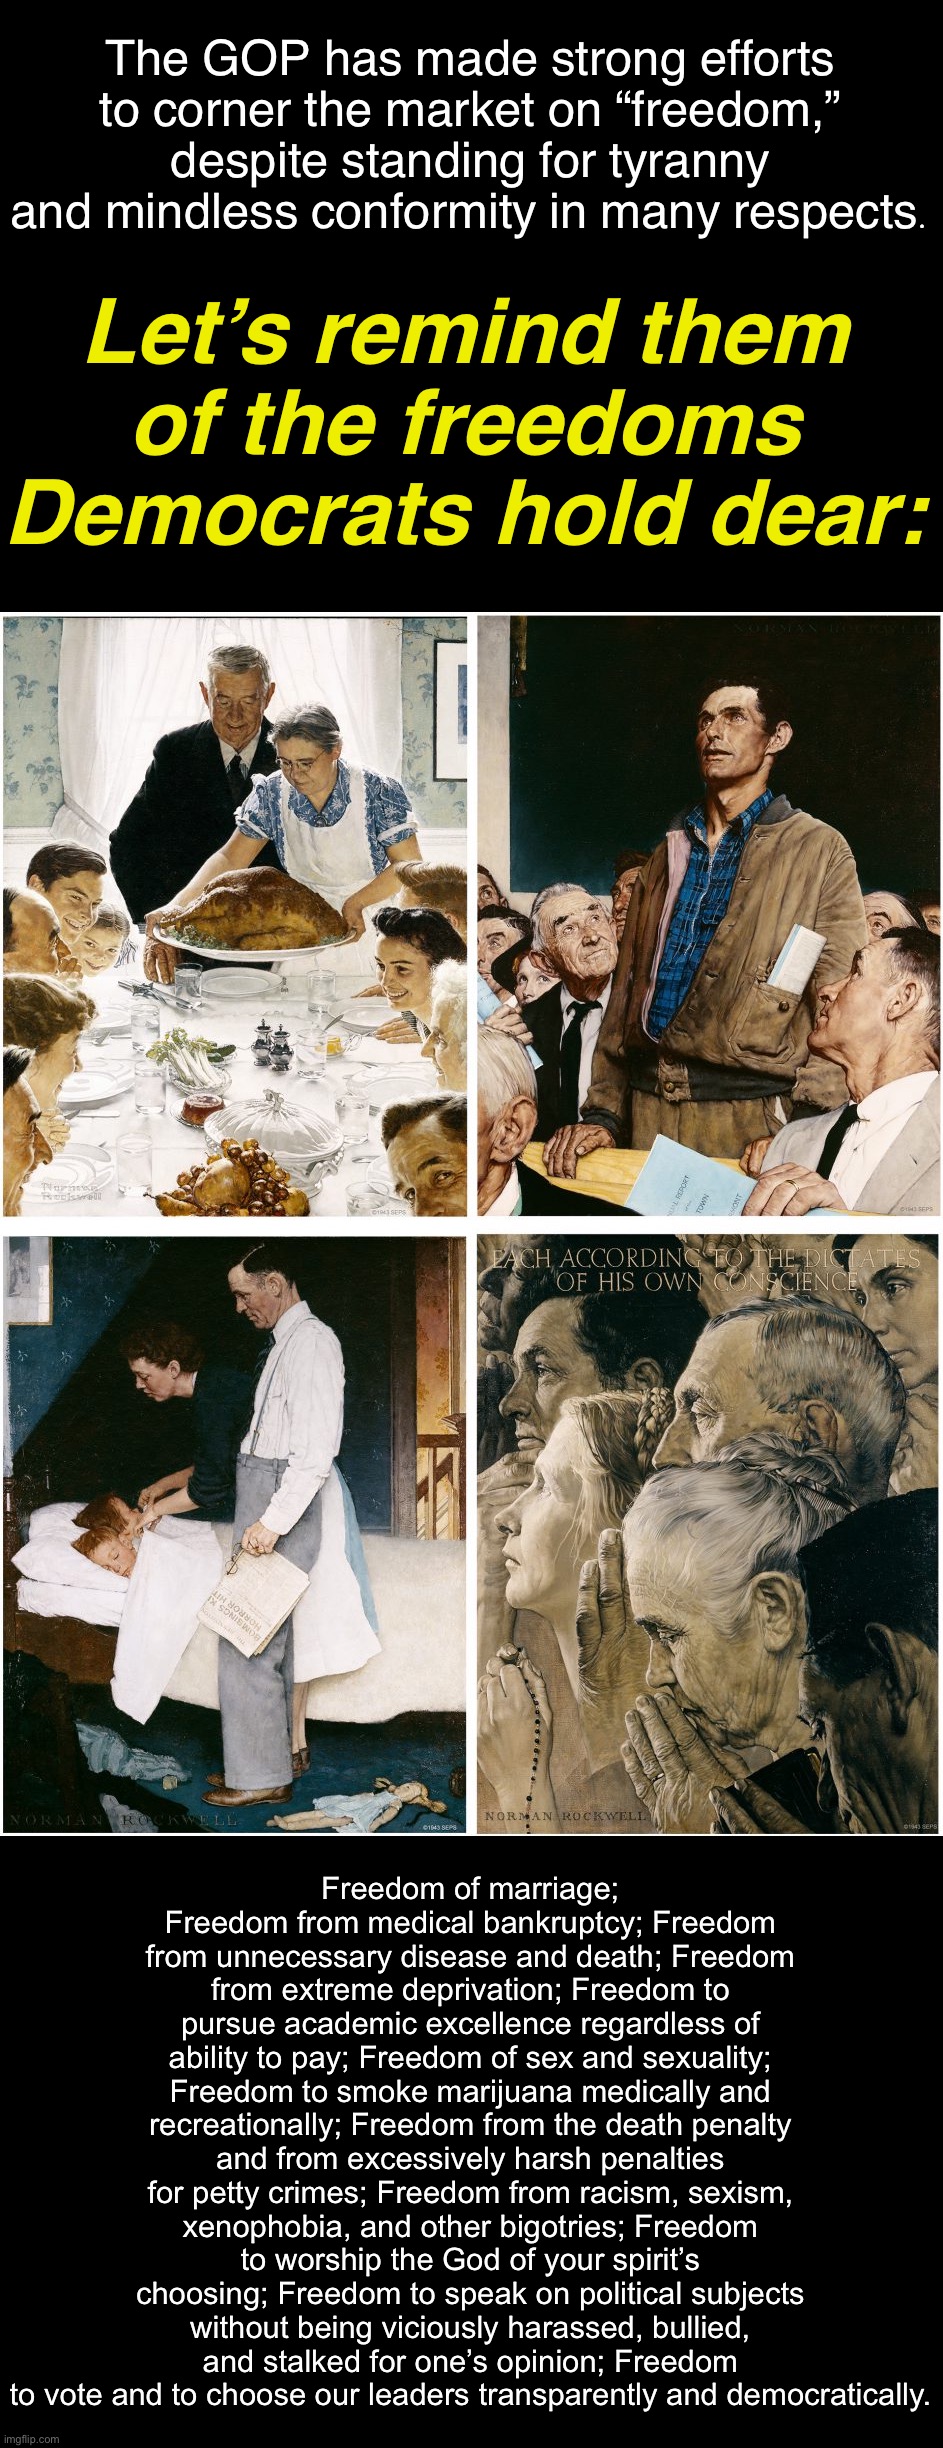 Remember Norman Rockwell’s “Four Freedoms”? The spirit of these paintings resides in the Democratic Party. | The GOP has made strong efforts to corner the market on “freedom,” despite standing for tyranny and mindless conformity in many respects. Let’s remind them of the freedoms Democrats hold dear:; Freedom of marriage; Freedom from medical bankruptcy; Freedom from unnecessary disease and death; Freedom from extreme deprivation; Freedom to pursue academic excellence regardless of ability to pay; Freedom of sex and sexuality; Freedom to smoke marijuana medically and recreationally; Freedom from the death penalty and from excessively harsh penalties for petty crimes; Freedom from racism, sexism, xenophobia, and other bigotries; Freedom to worship the God of your spirit’s choosing; Freedom to speak on political subjects without being viciously harassed, bullied, and stalked for one’s opinion; Freedom to vote and to choose our leaders transparently and democratically. | image tagged in norman rockwell four freedoms,democrat,democratic party,freedom,religious freedom,freedom of speech | made w/ Imgflip meme maker